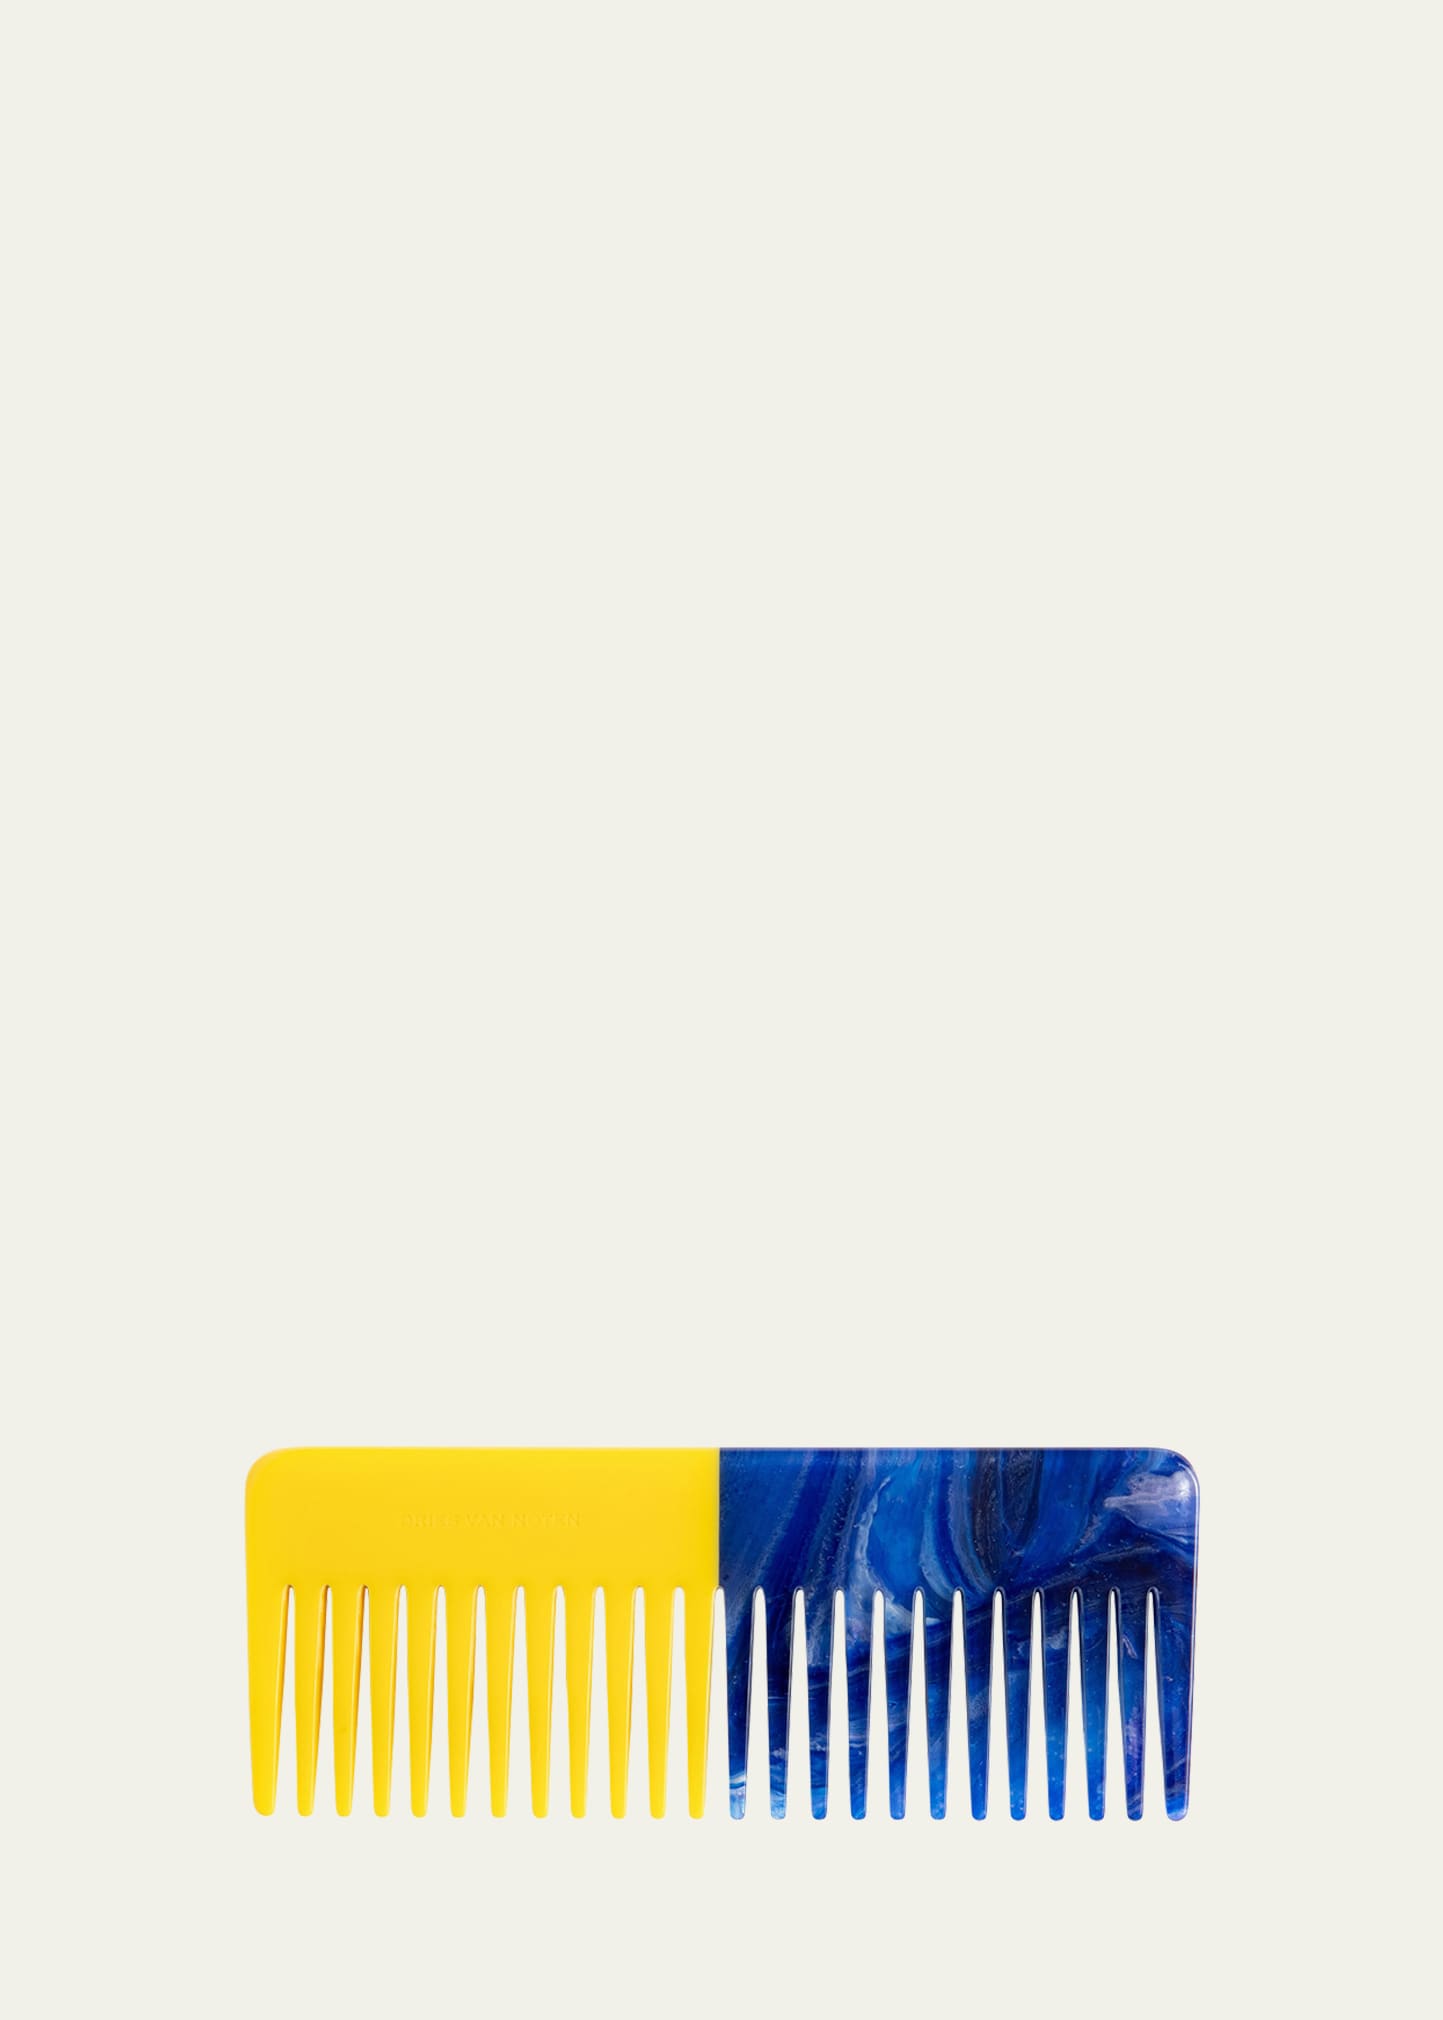 Blue and Yellow Wide-Tooth Comb